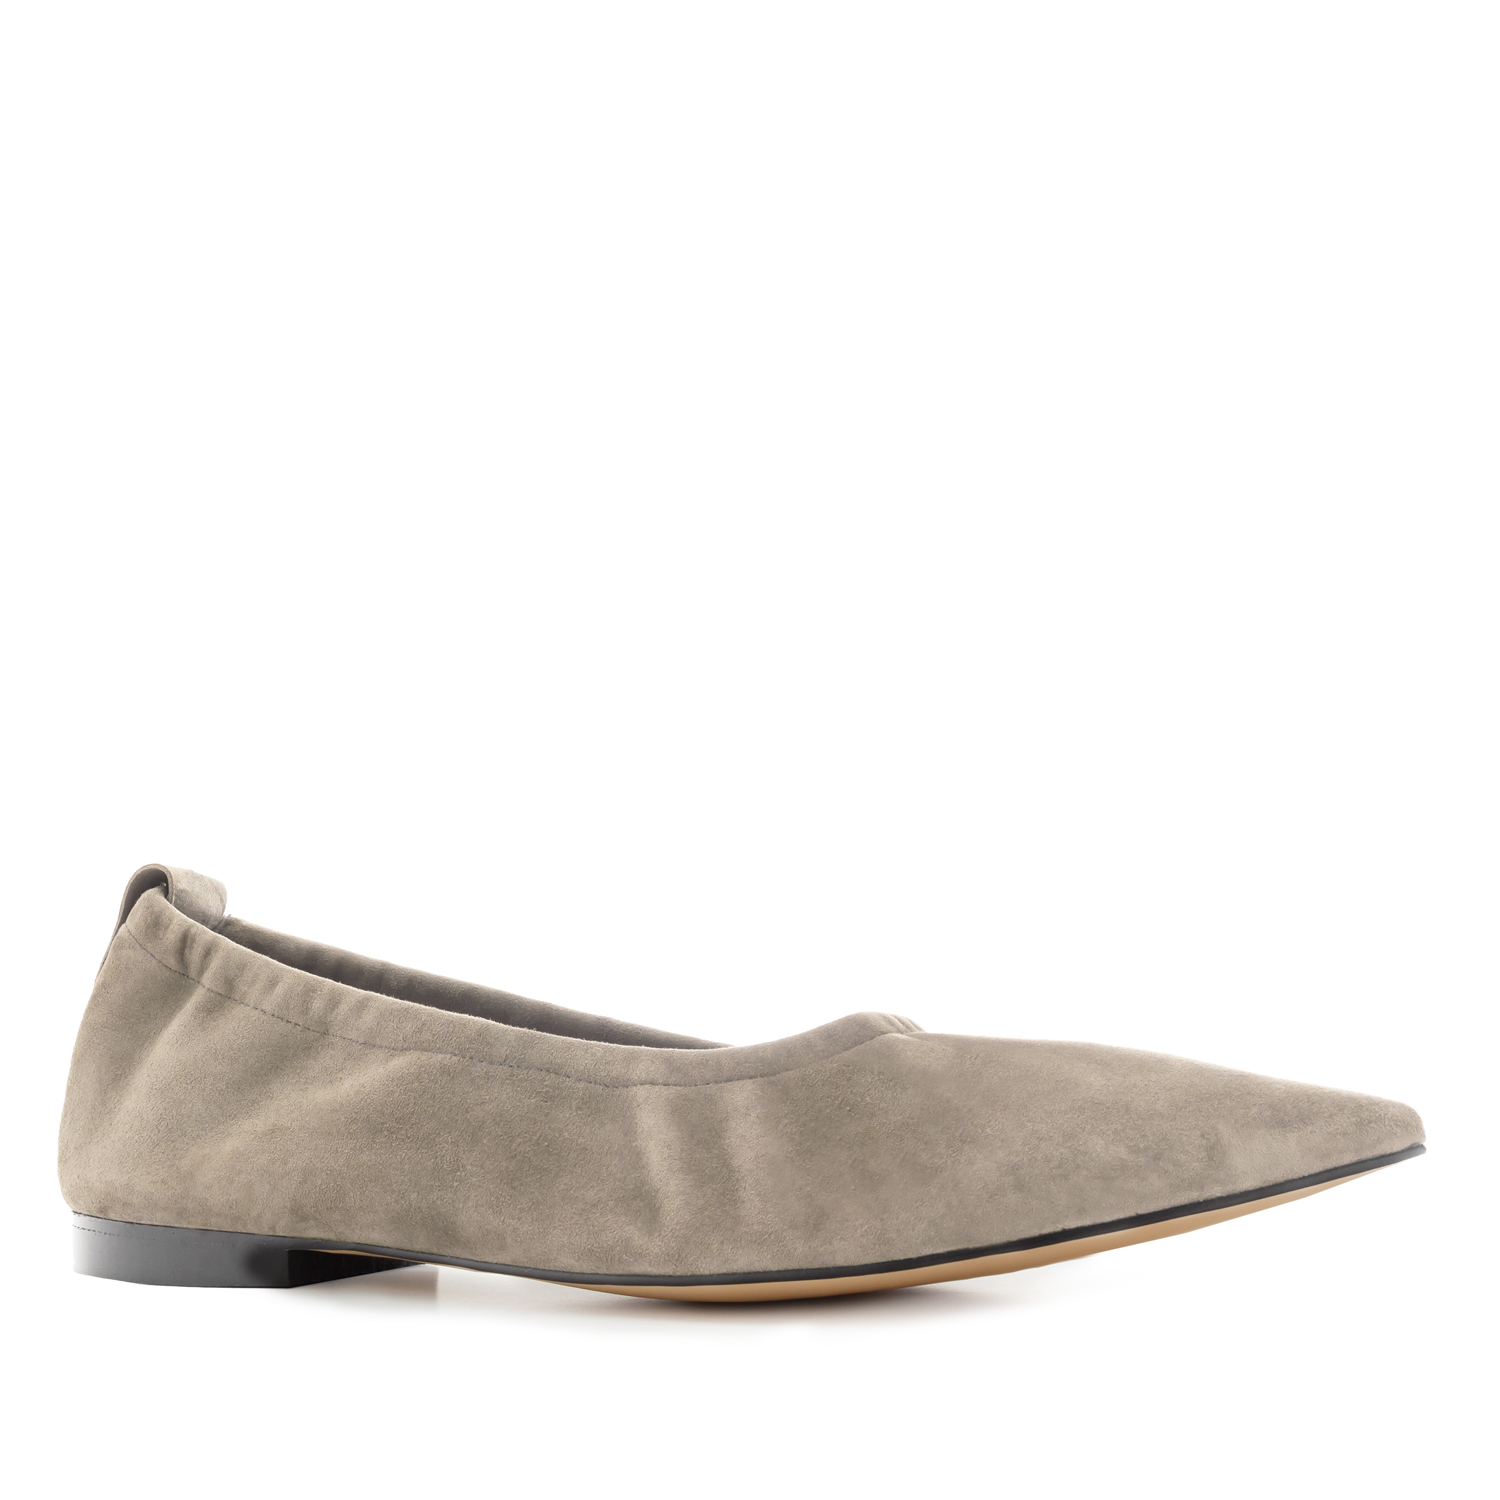 Elasticated Ballet Flats in Beige Suede Leather 